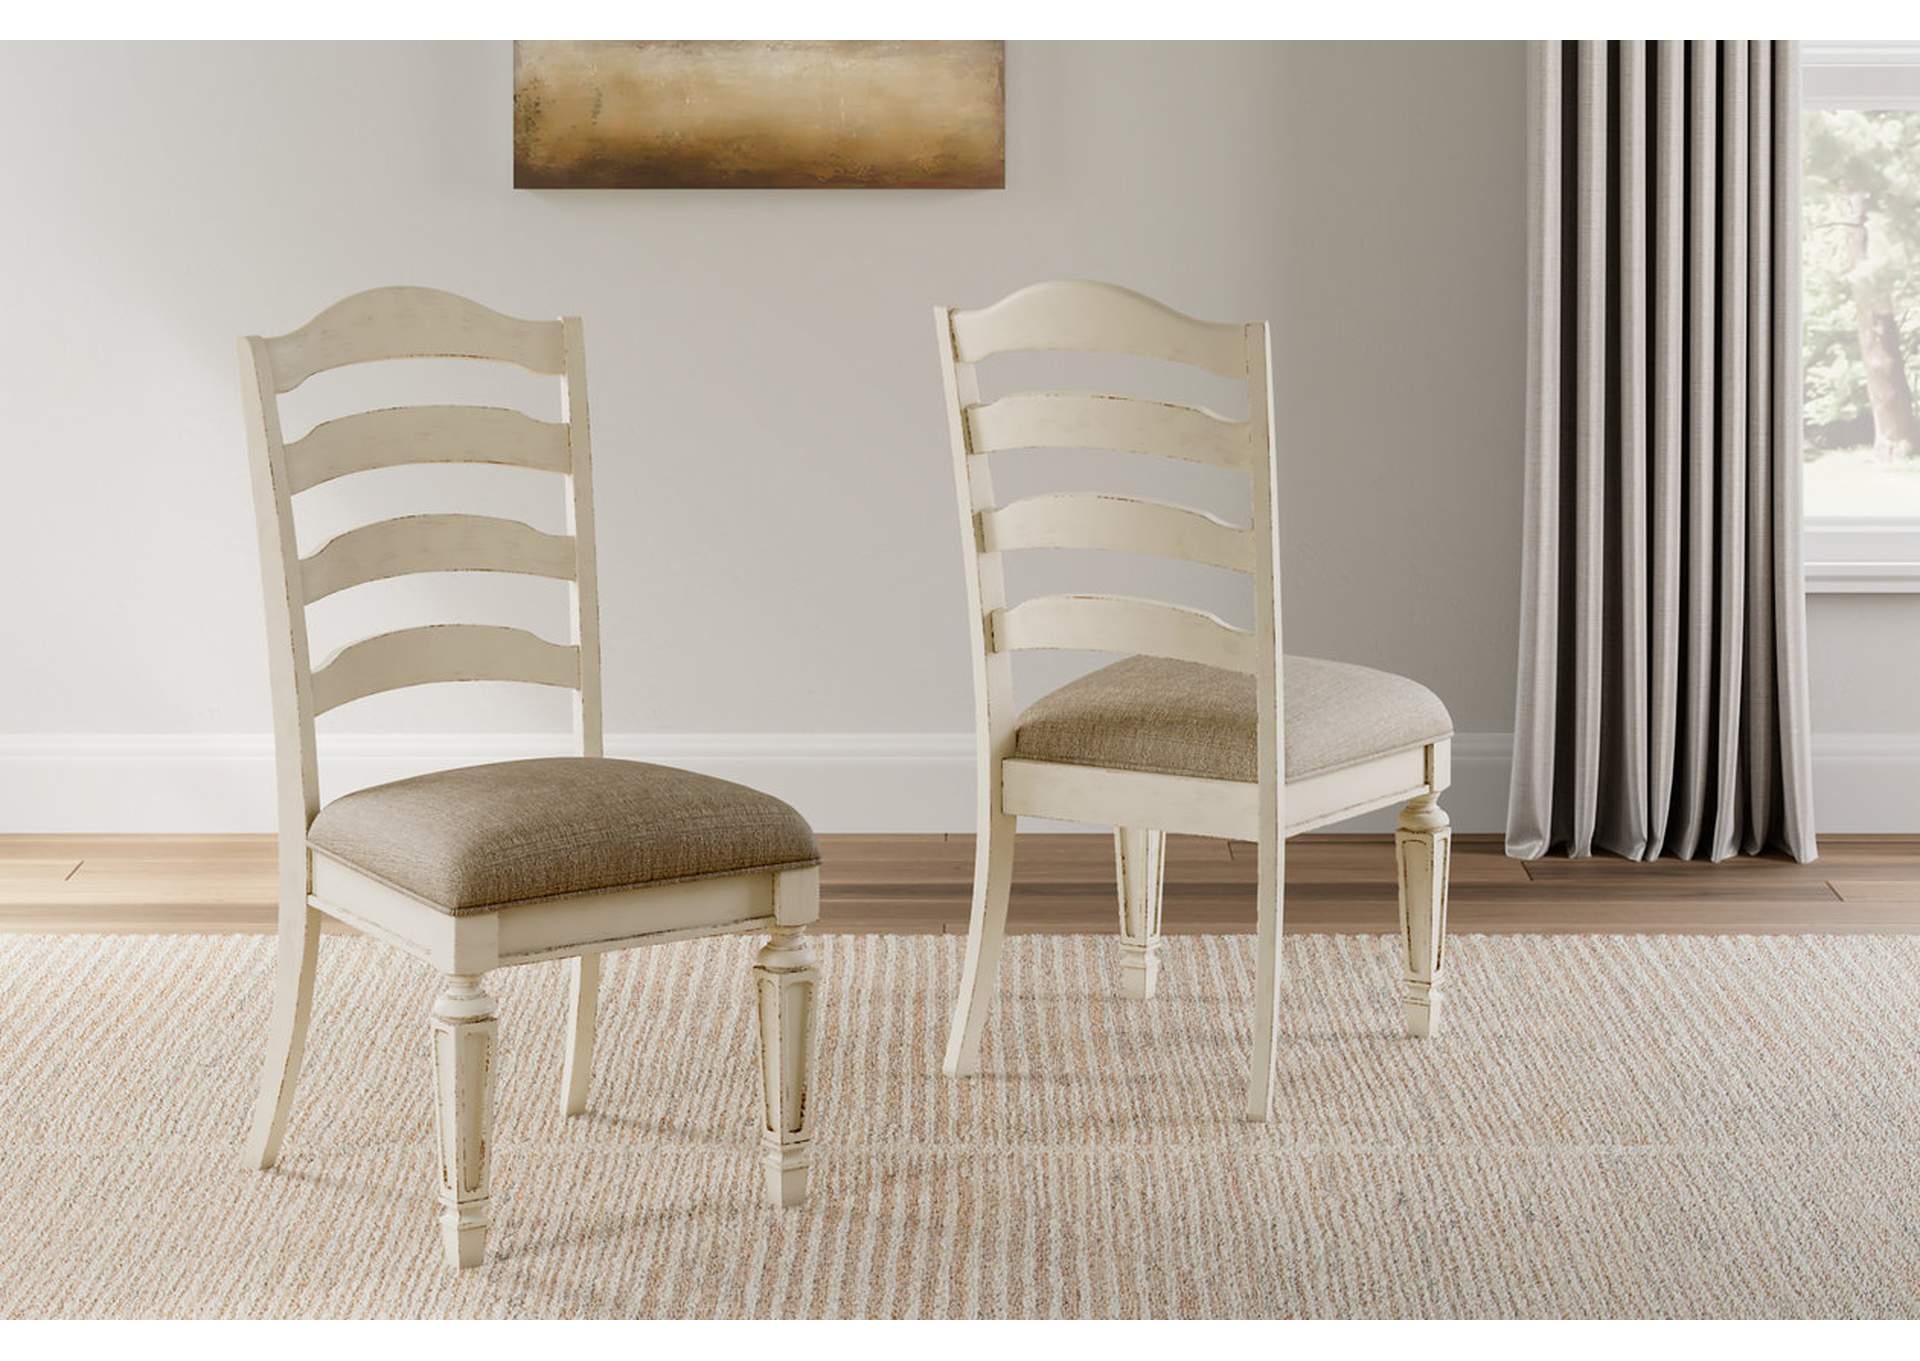 Realyn Dining Chair,Signature Design By Ashley